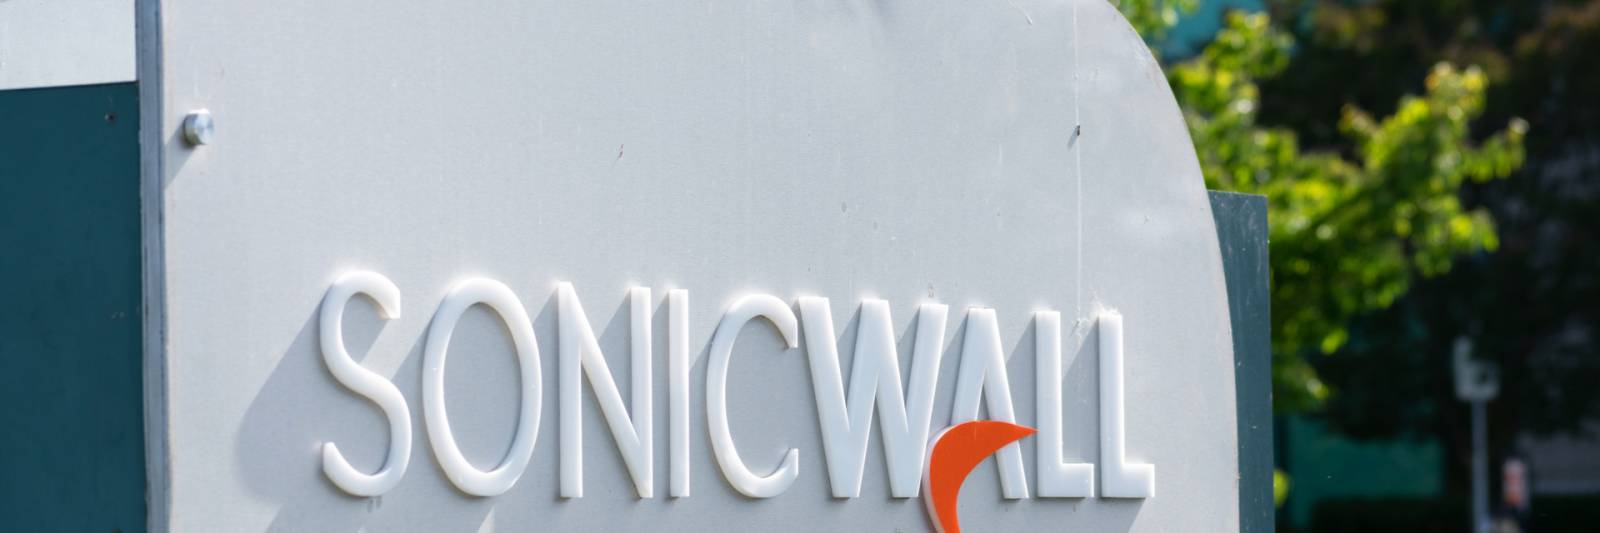 Hackers Attempt To Exploit Sonicwall Zero Day Vulnerability